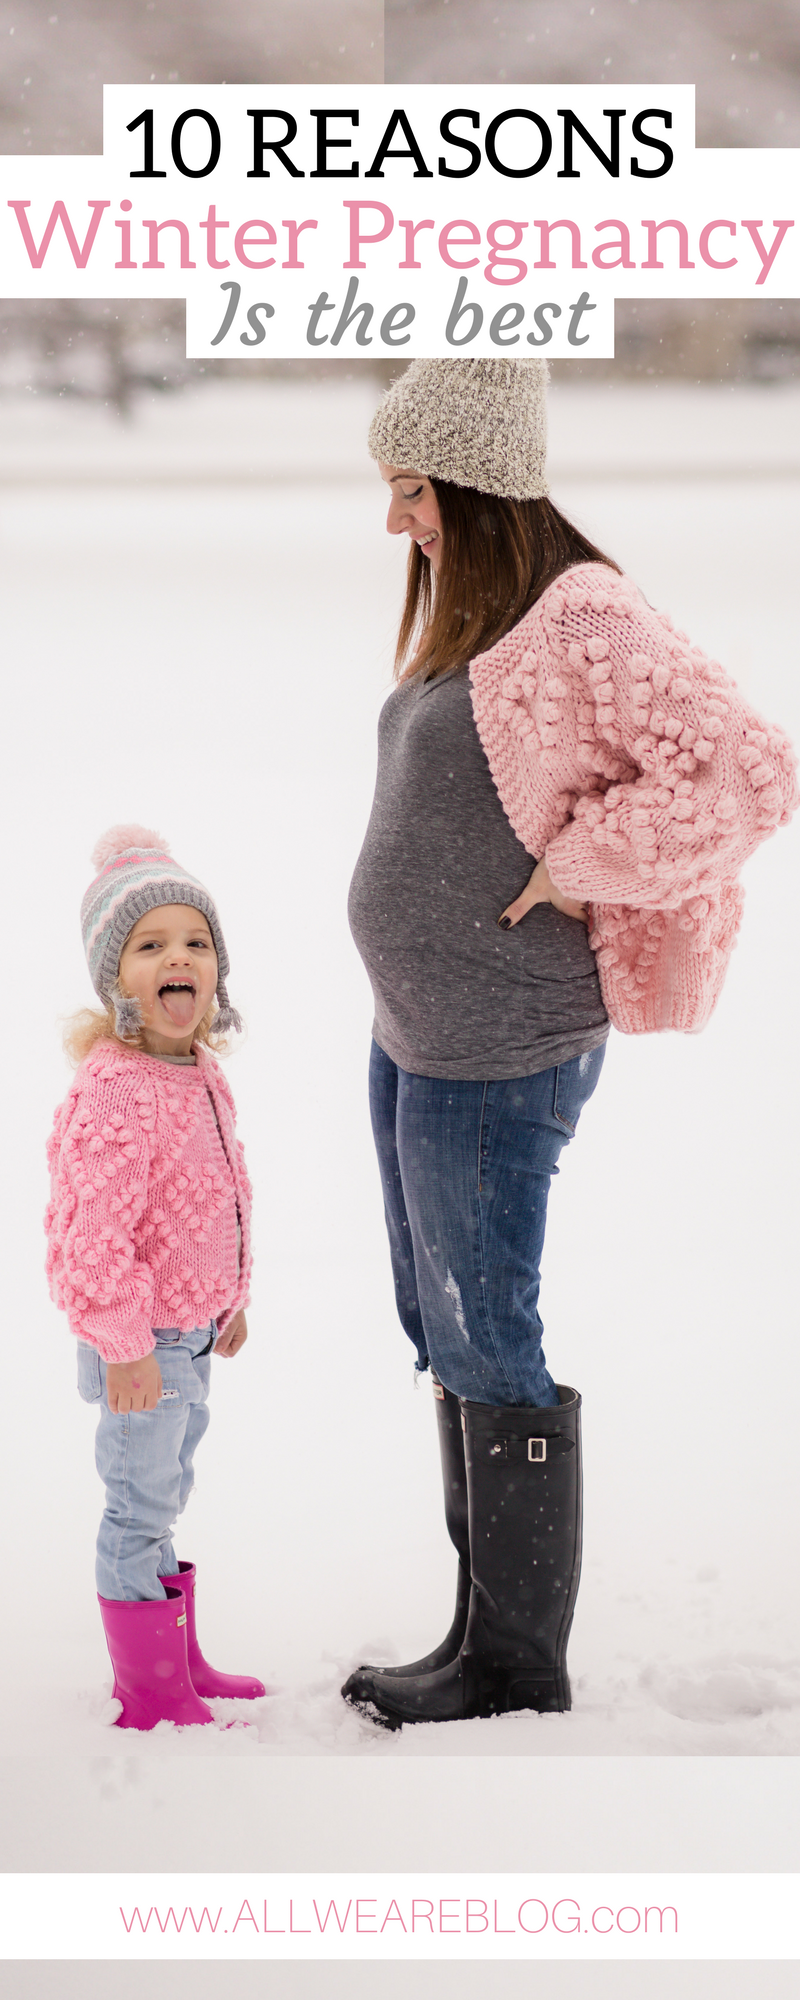 10 Reasons why a Winter Pregnancy is the Best